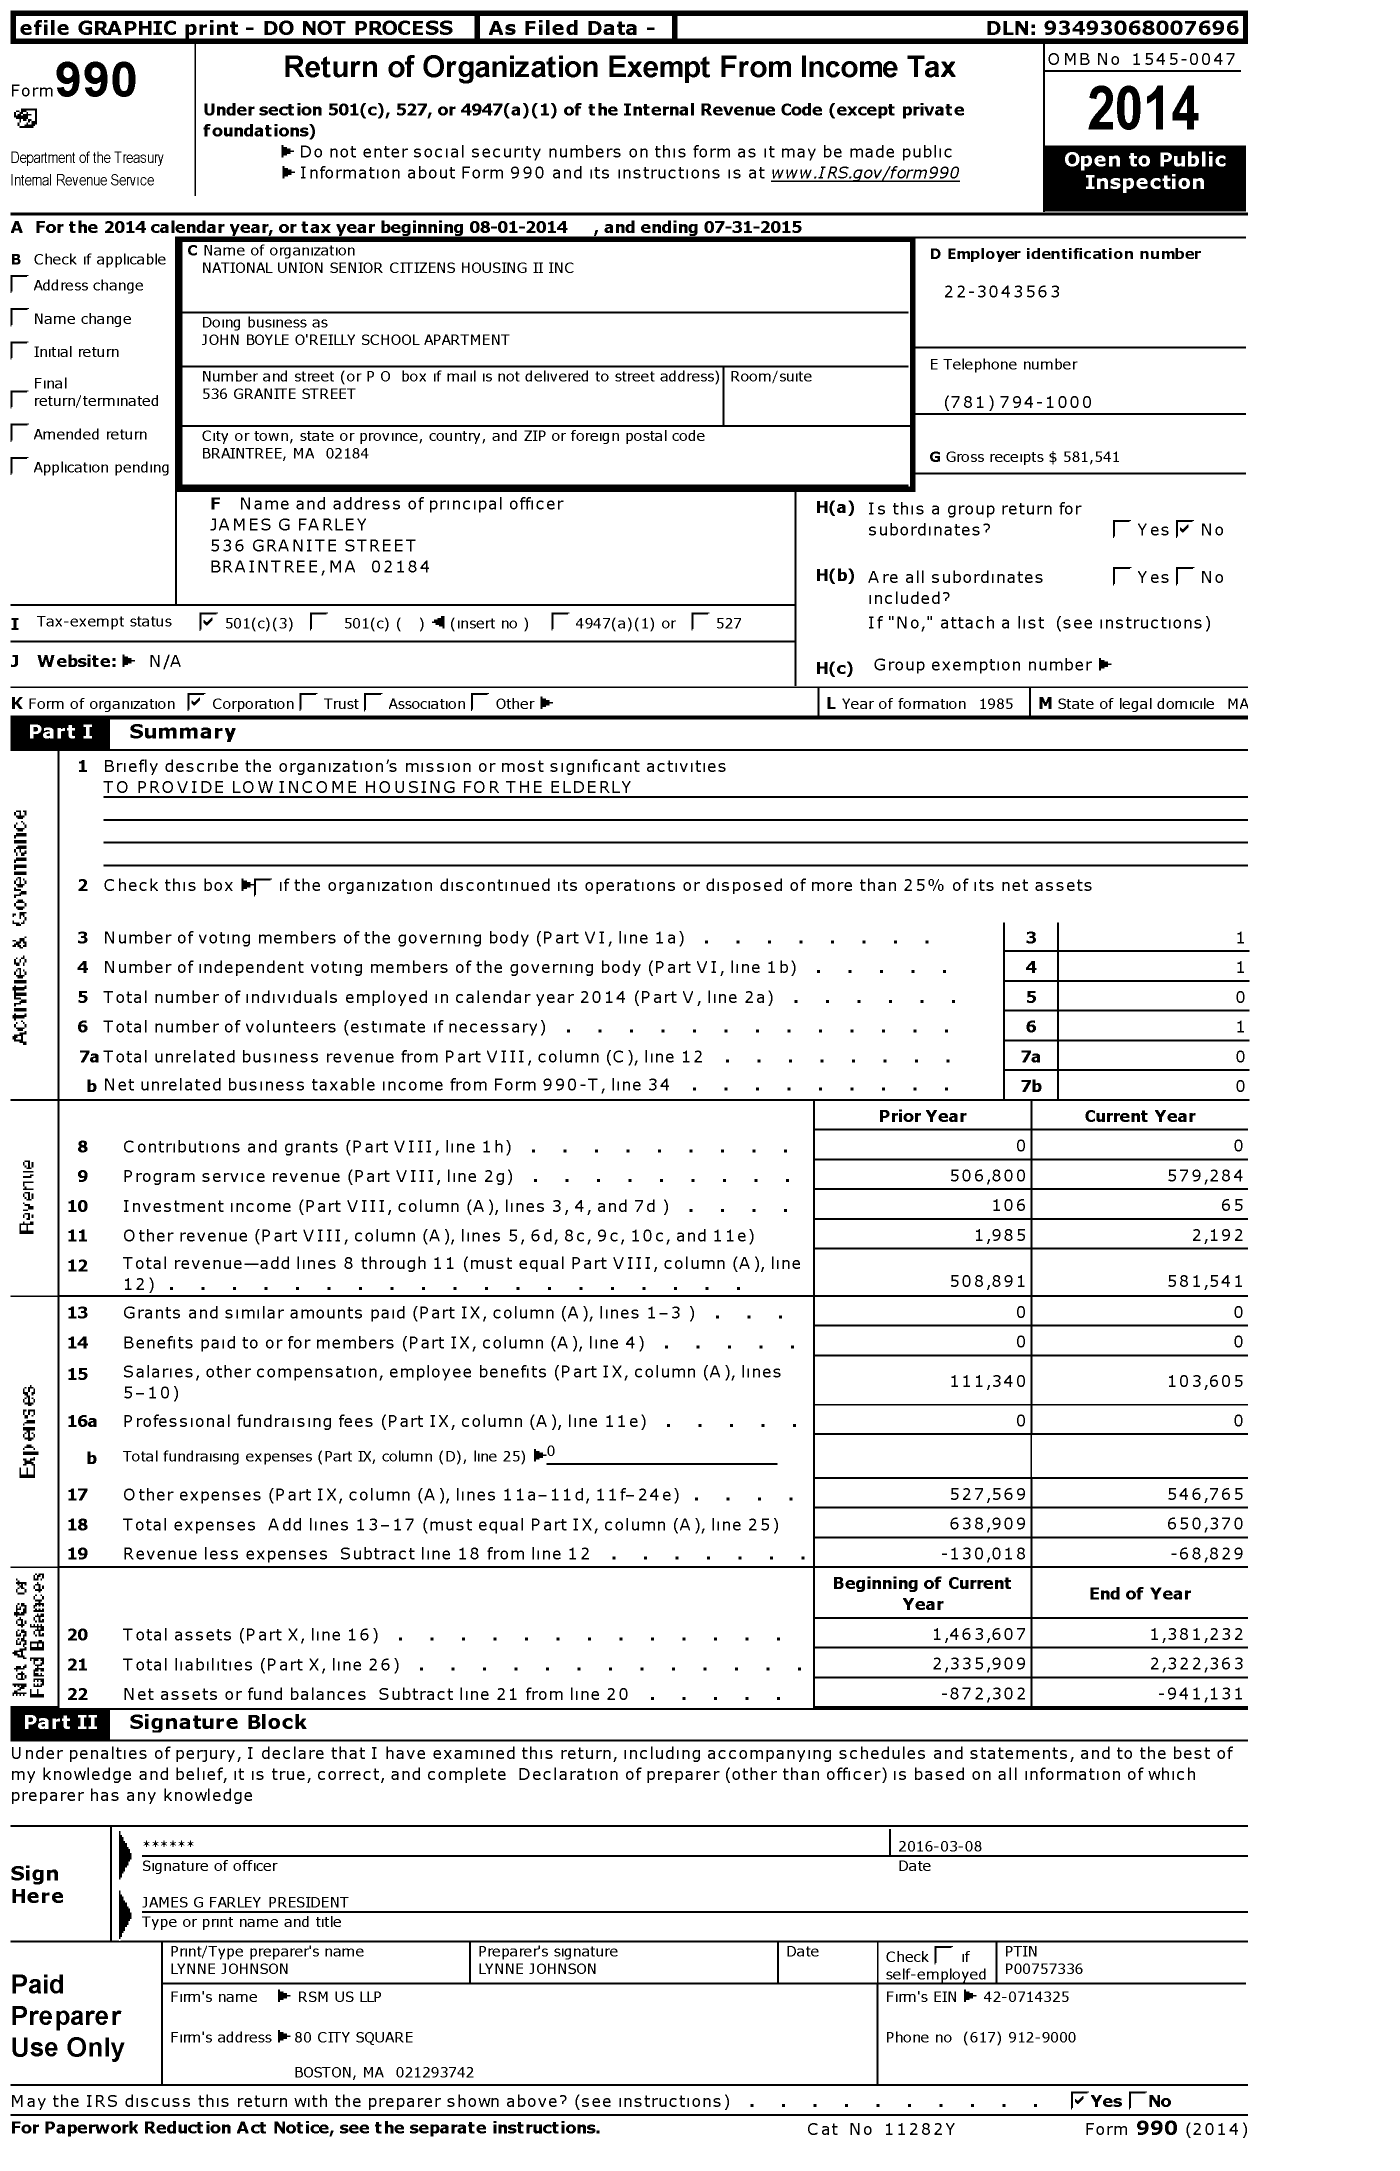 Image of first page of 2014 Form 990 for National Union Senior Citizens Housing Ii